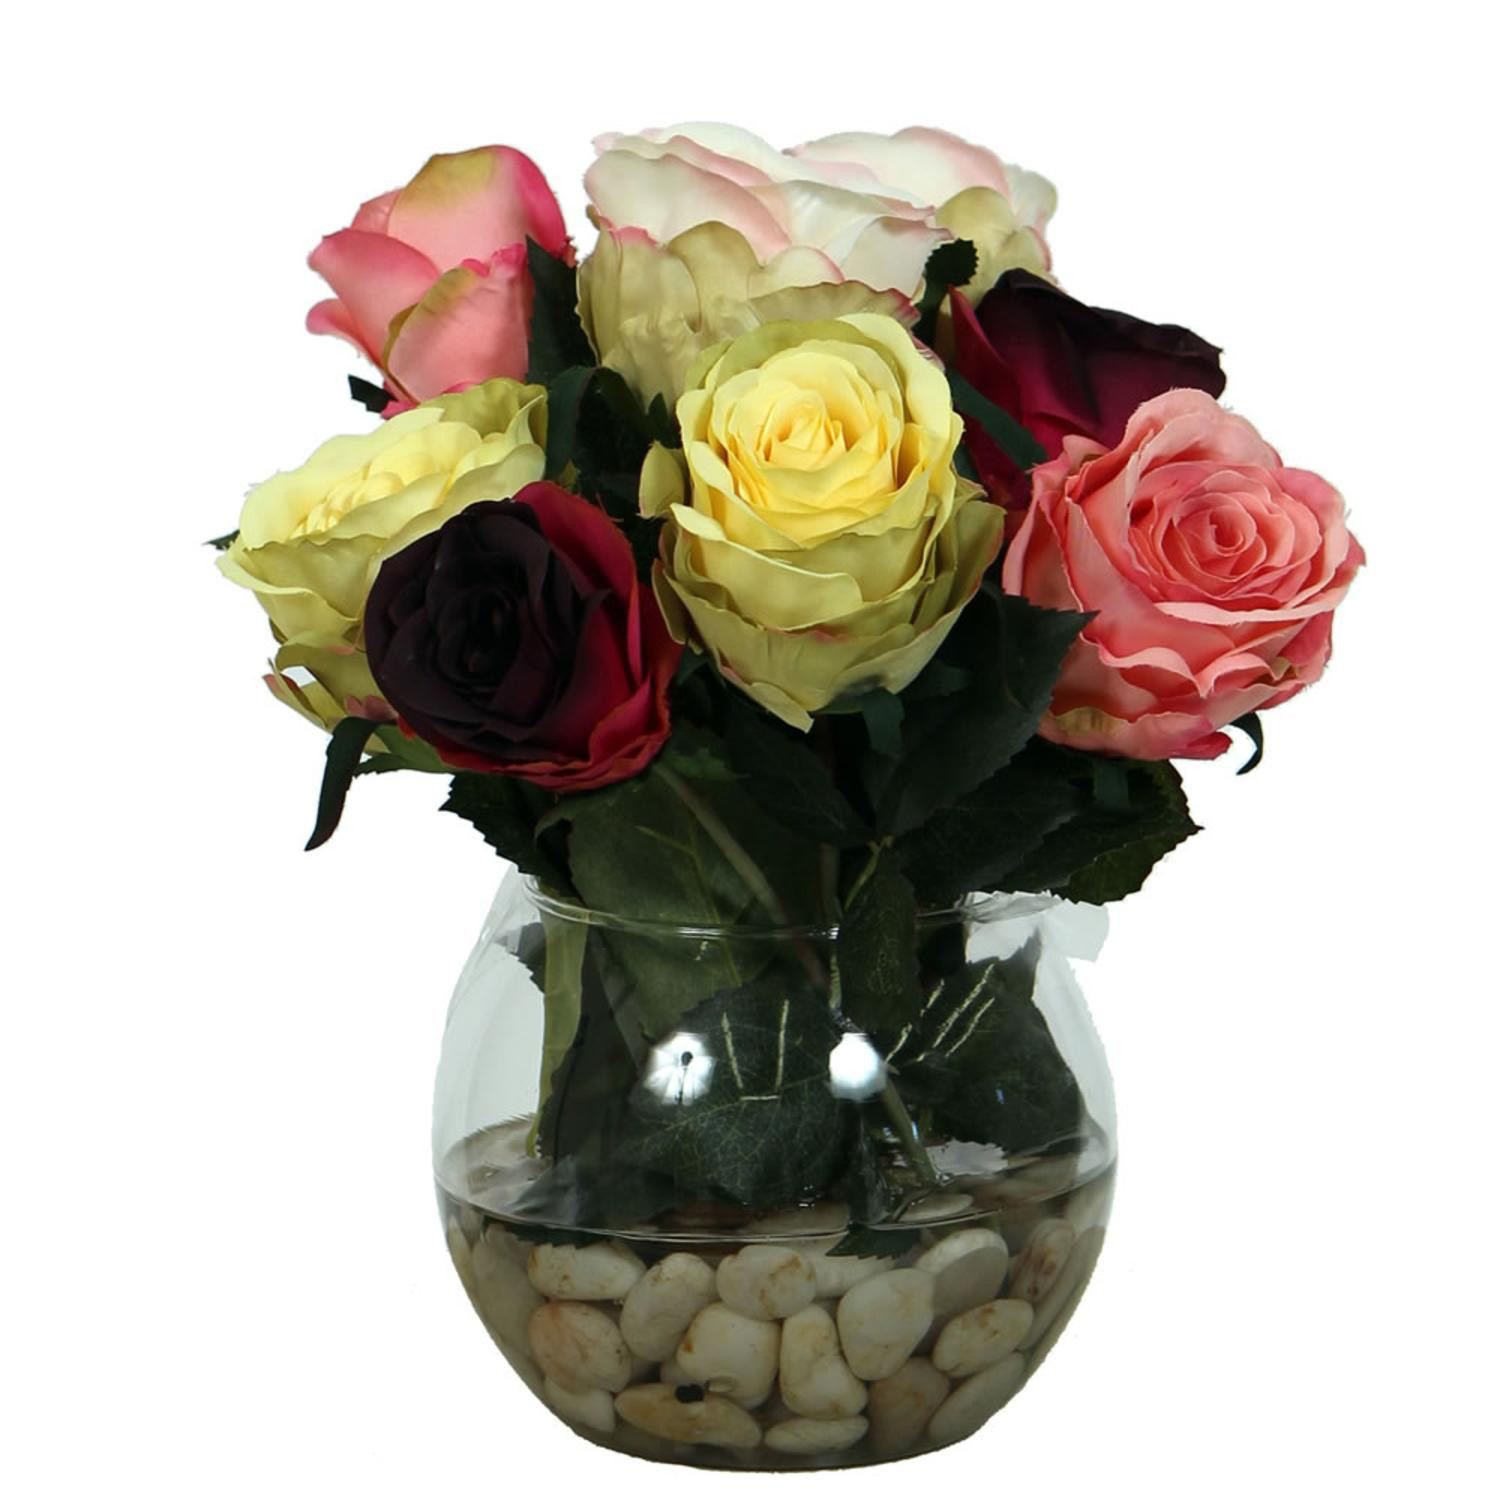 19 Stylish What is A Rose Bowl Vase 2024 free download what is a rose bowl vase of how to arrange flowers in a bowl vase flowers healthy with 12 artificial multi color rose flower arrangement in gl bowl vase walmart